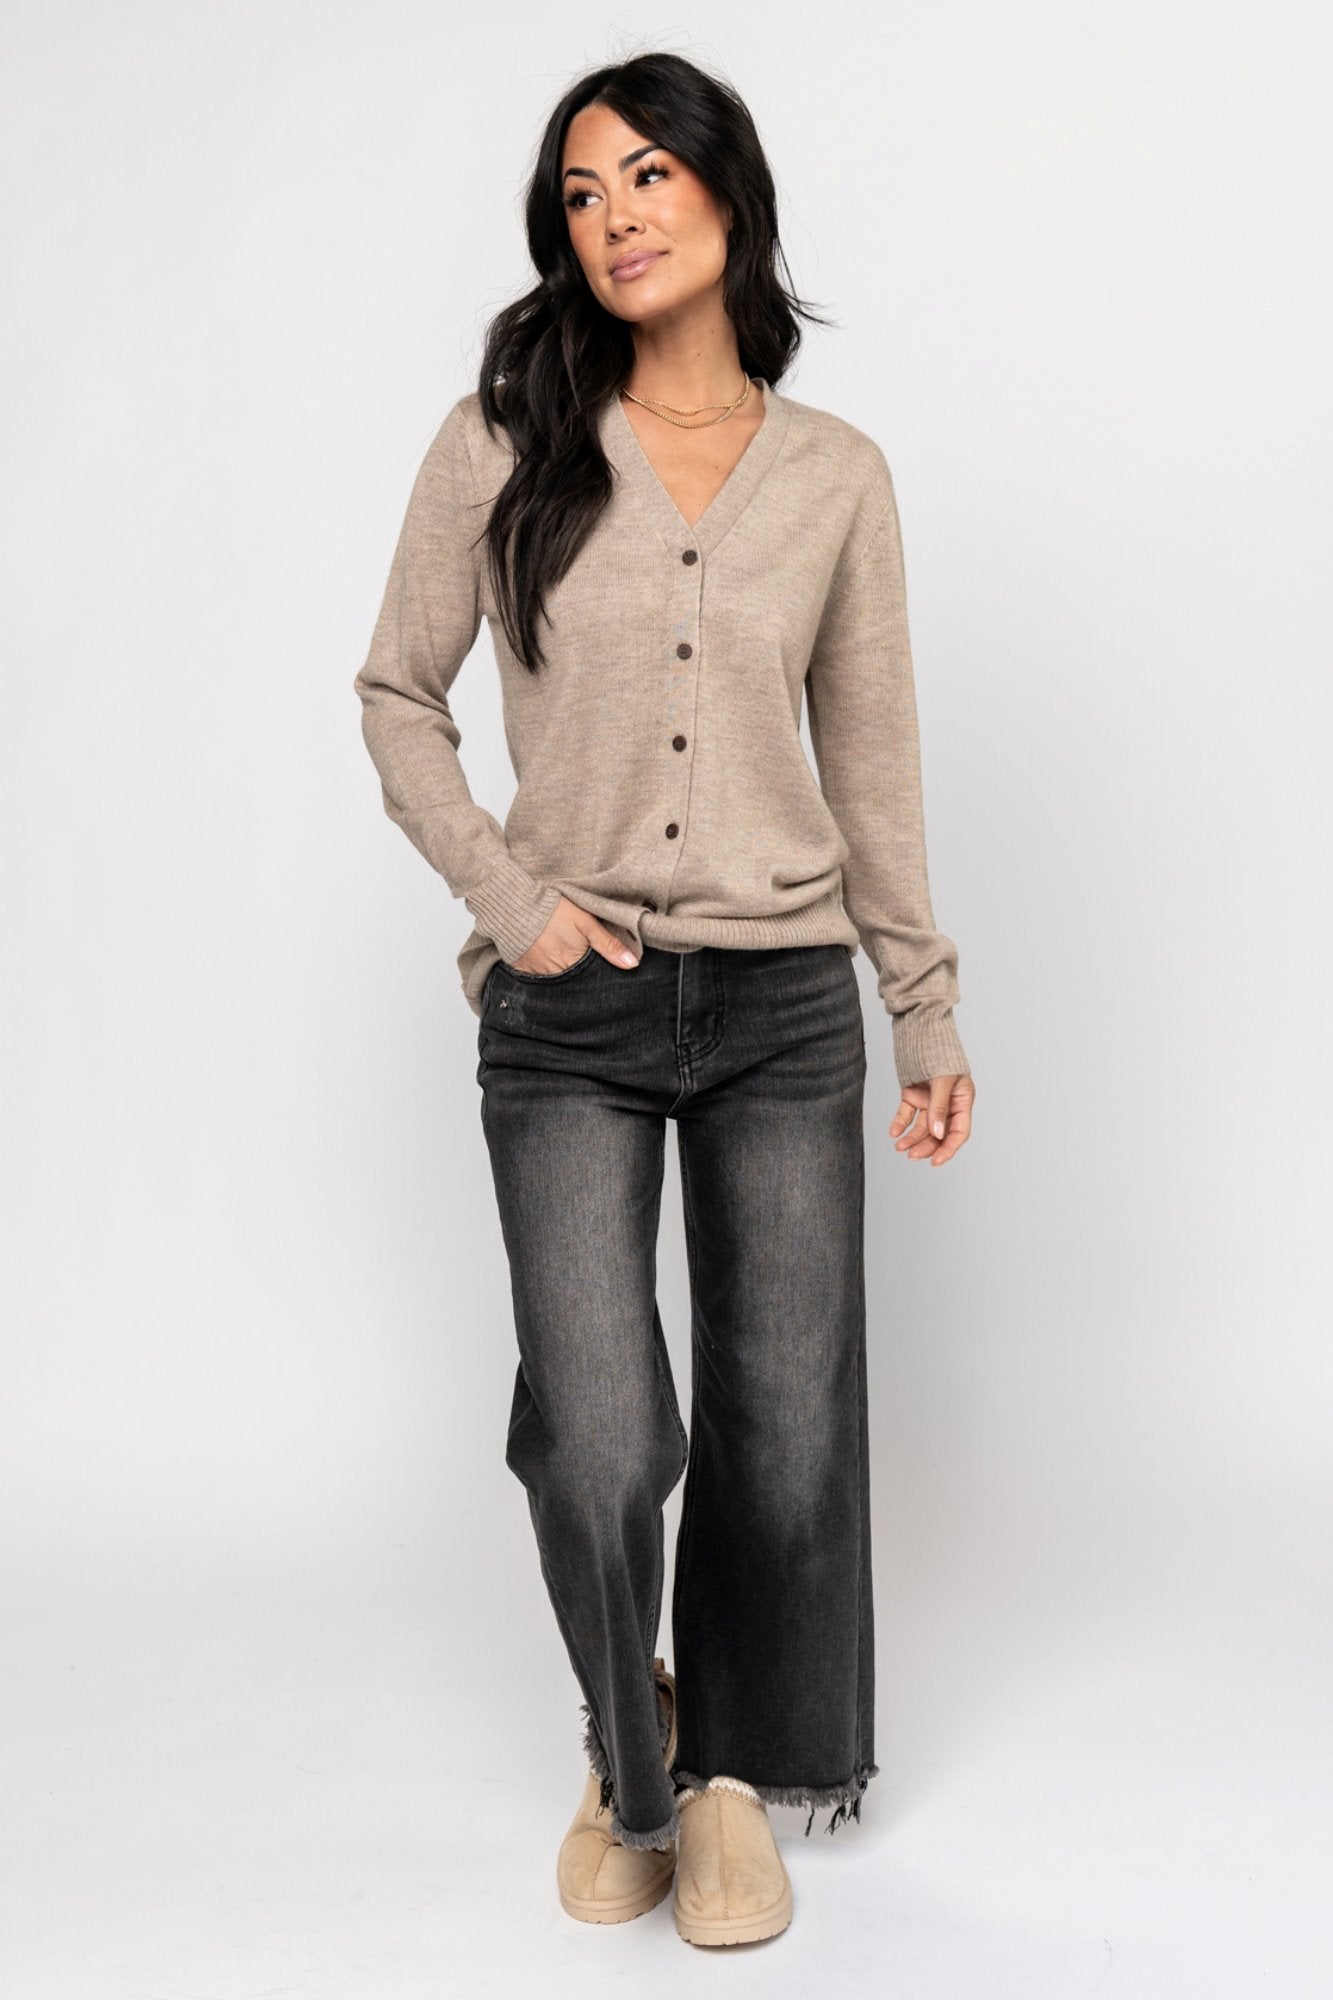 Hueson Cardigan in Taupe Holley Girl 